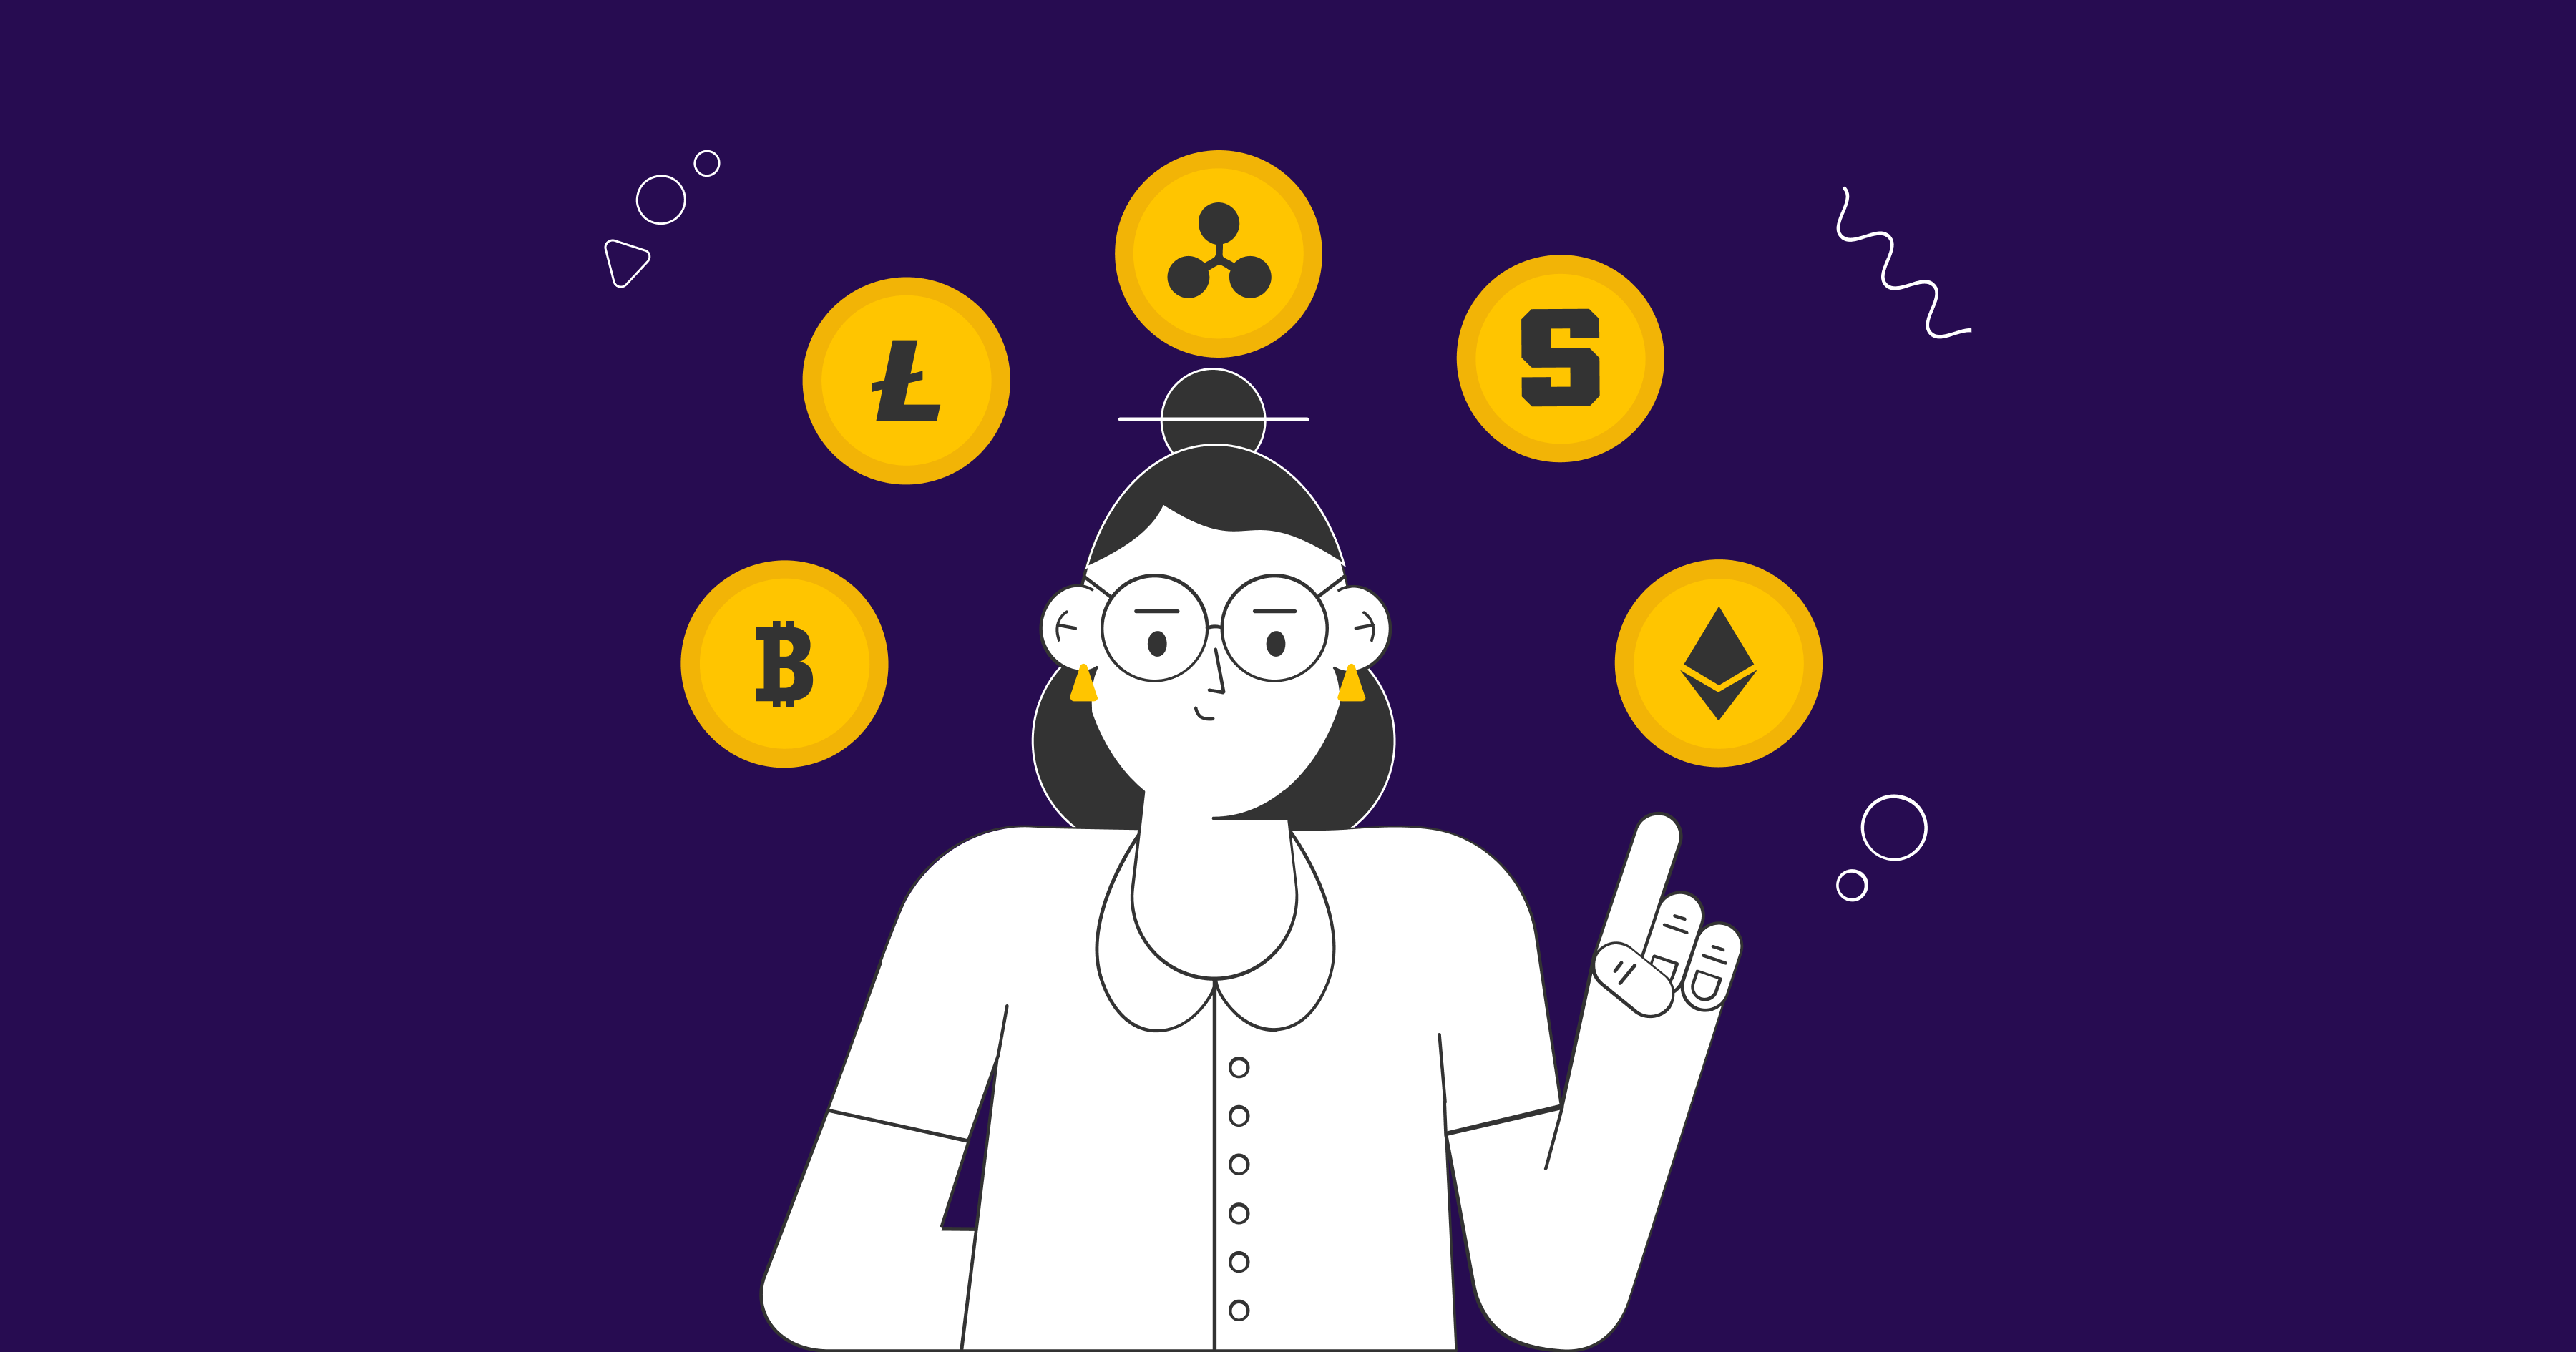 Cryptocurrency Pros and Cons